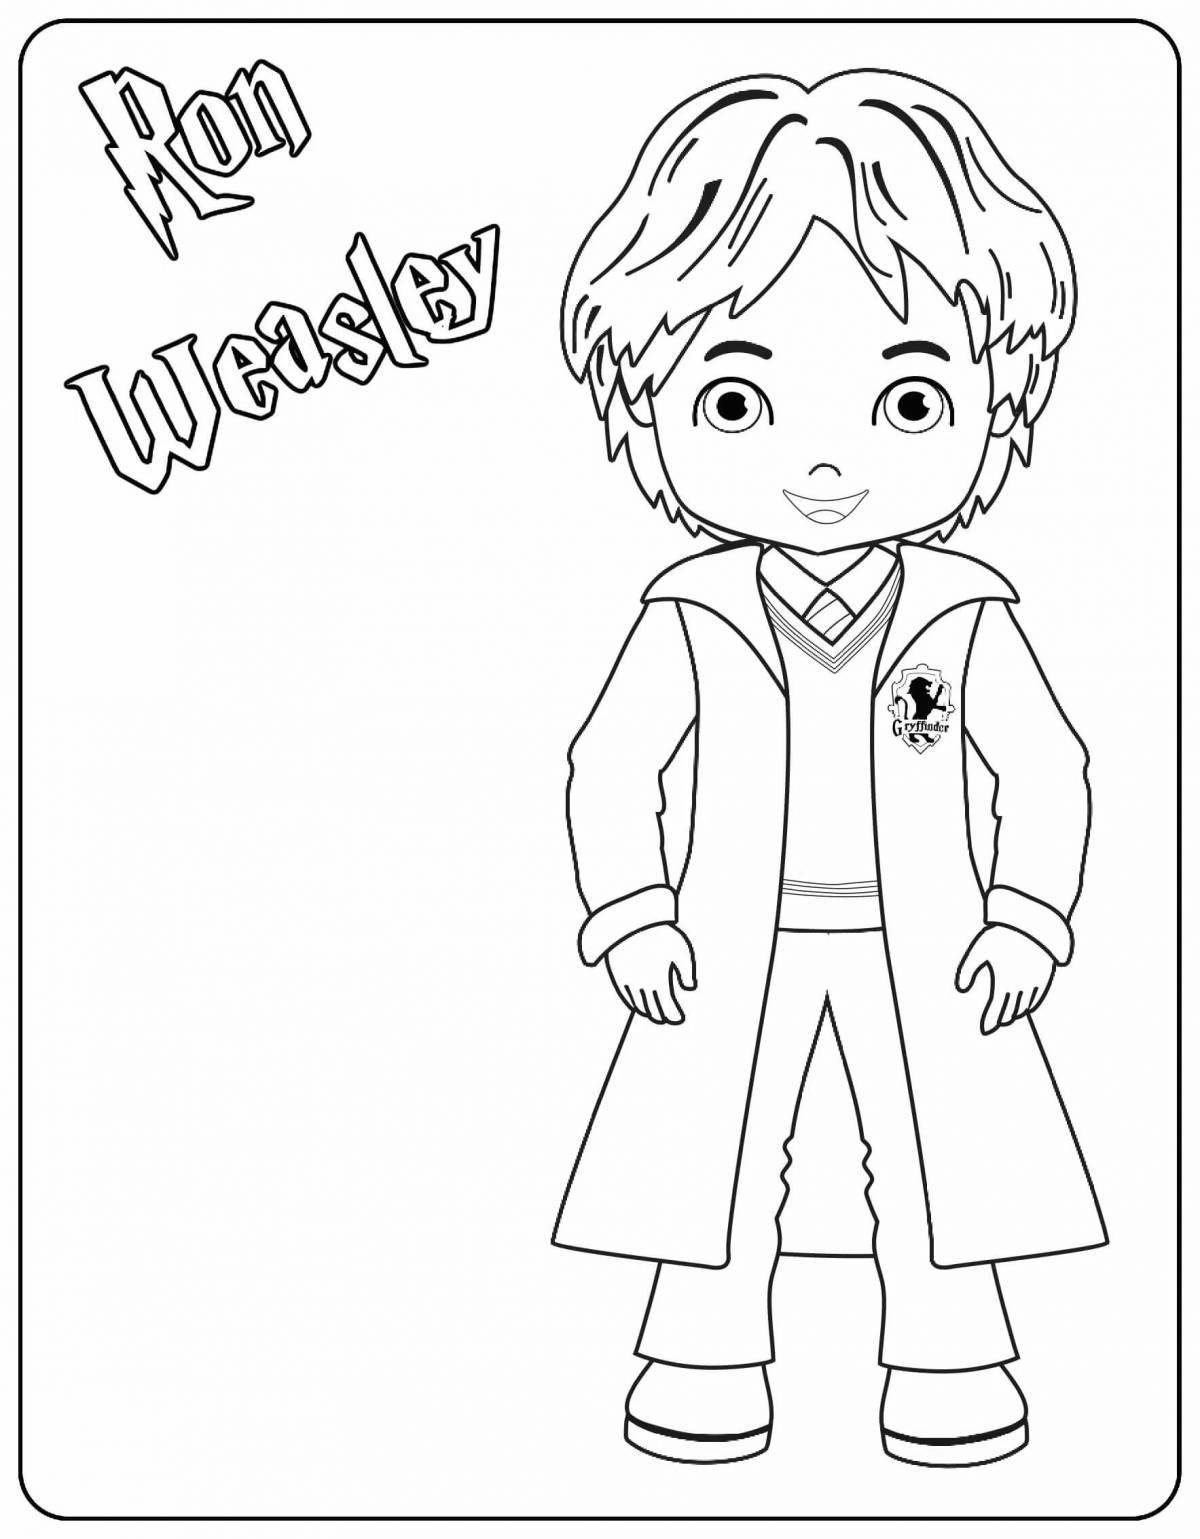 Ron Weasley Live Coloring